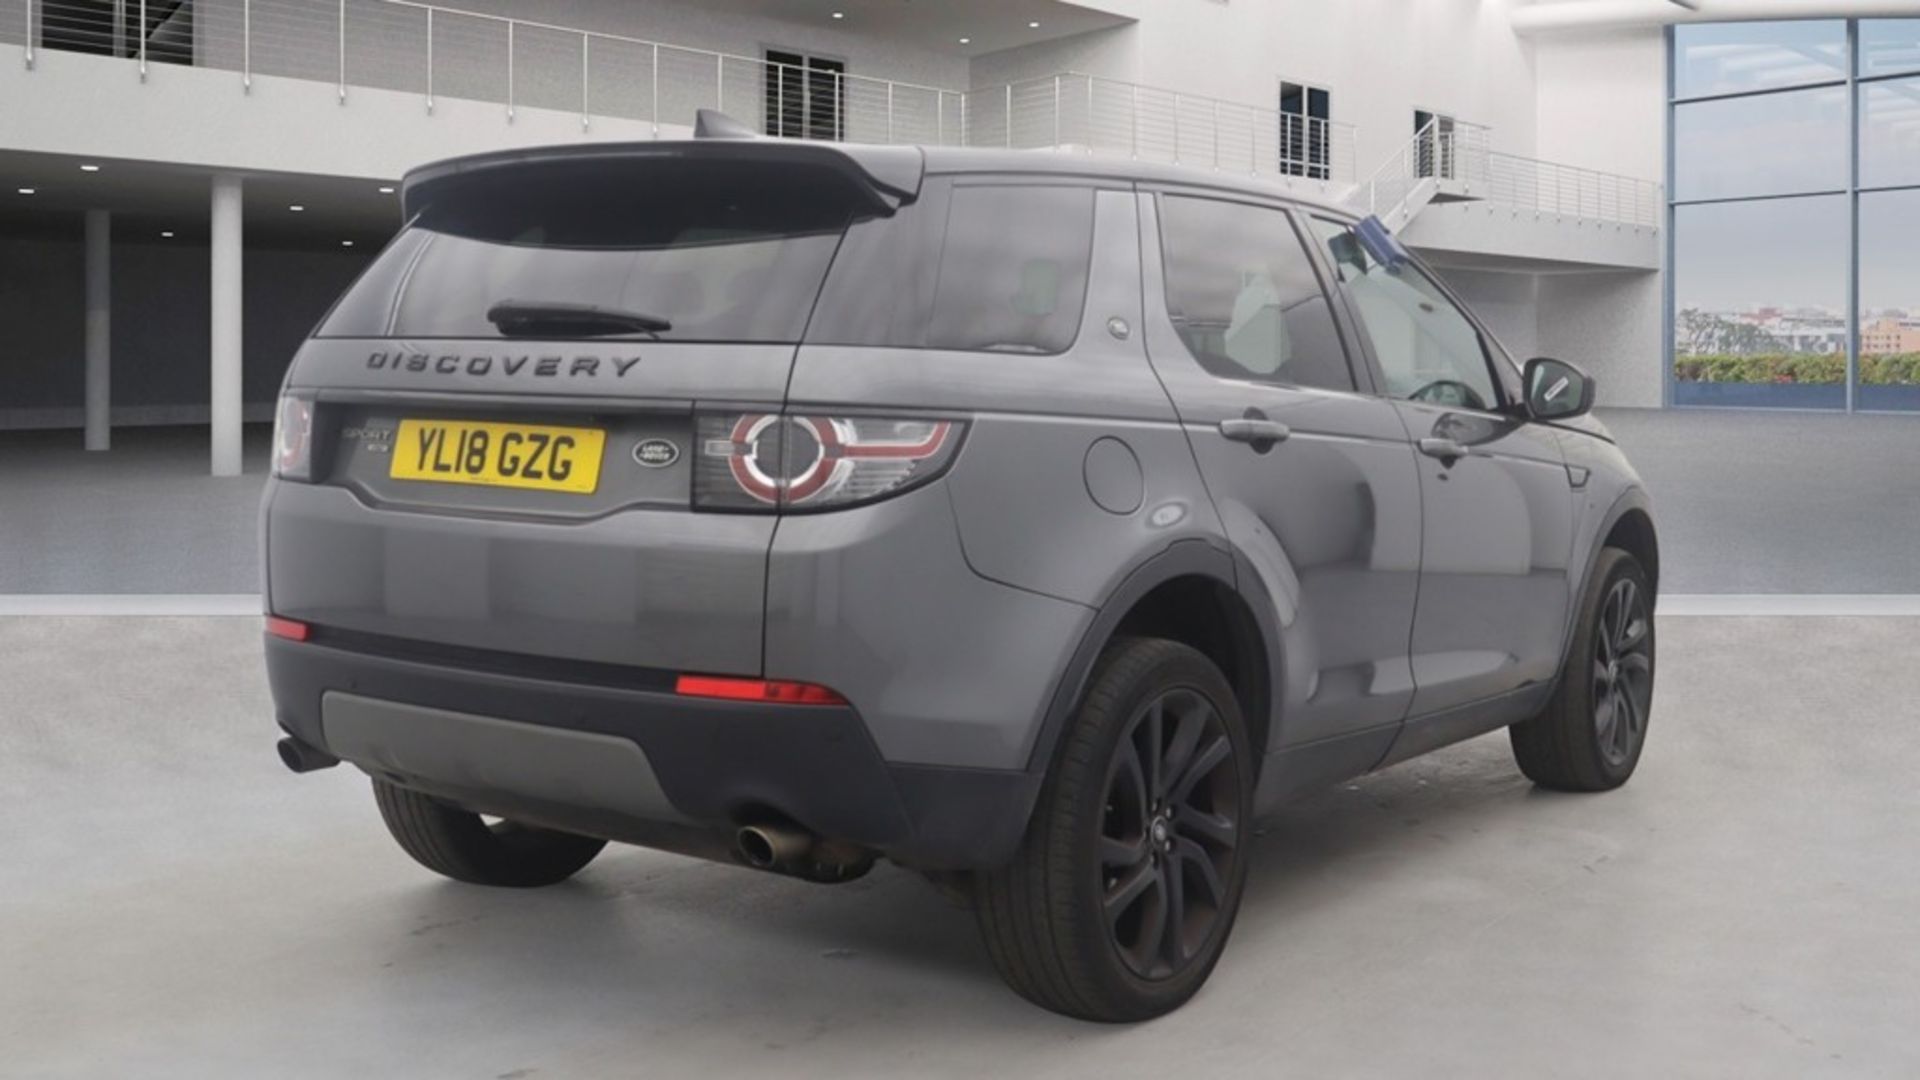 ** ON SALE ** Land Rover Discovery Sport HSE Black Edition 2.0 TD4 180 2018 '18 Reg' Sat Nav - Image 3 of 9